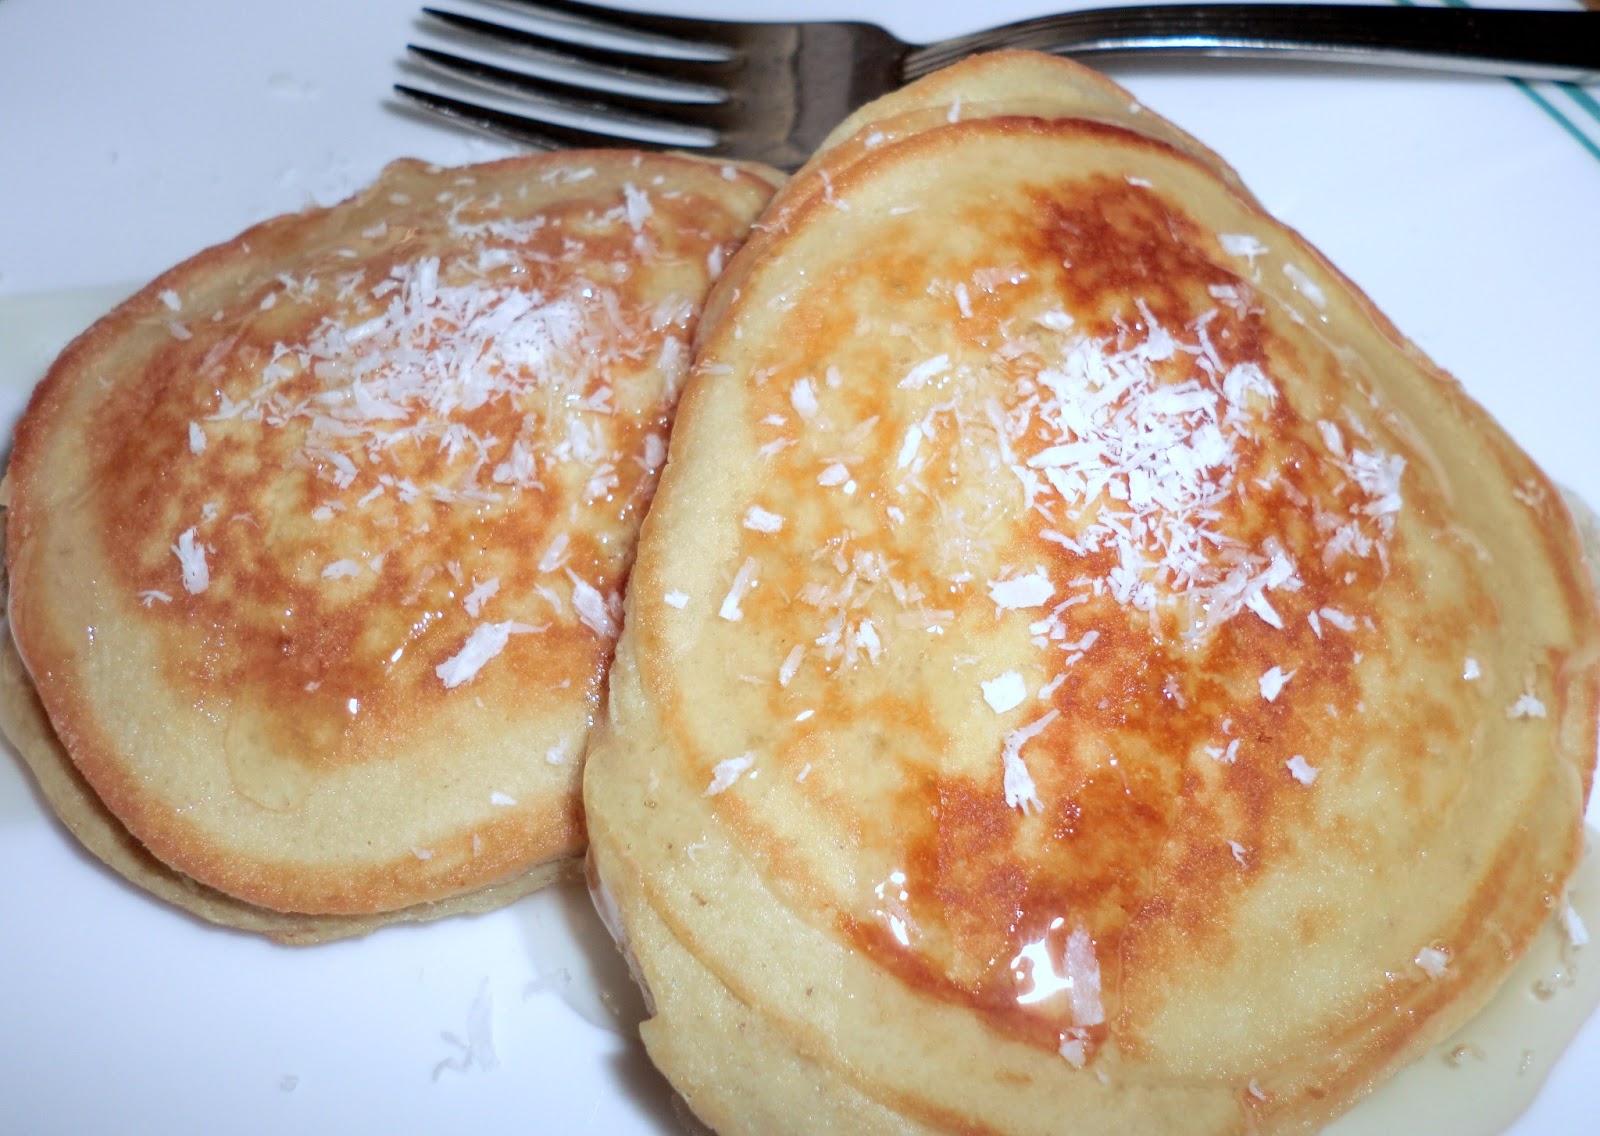 make to make how to  how pancakes. flour it cinnamon is these easy pancakes love with